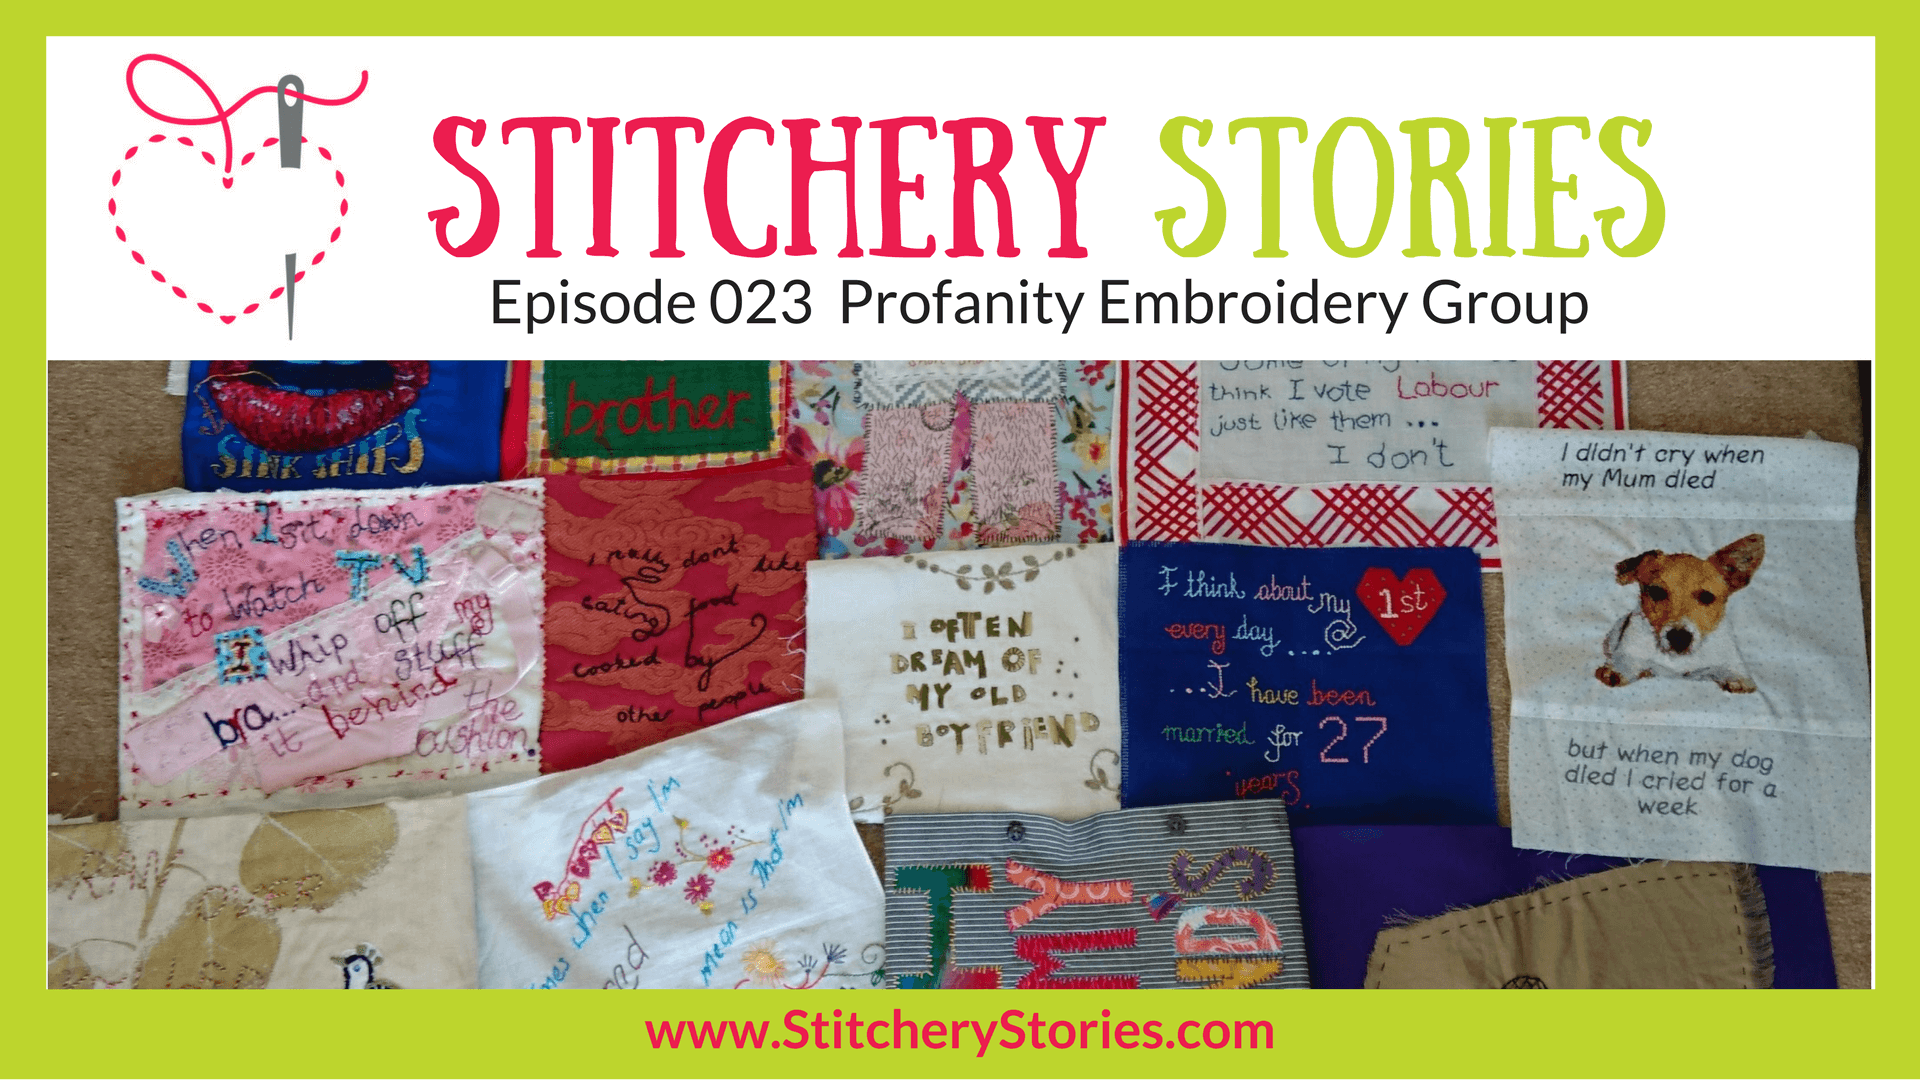 Profanity Embroidery Group Stitchery Stories Textile Art Podcast Wide Art